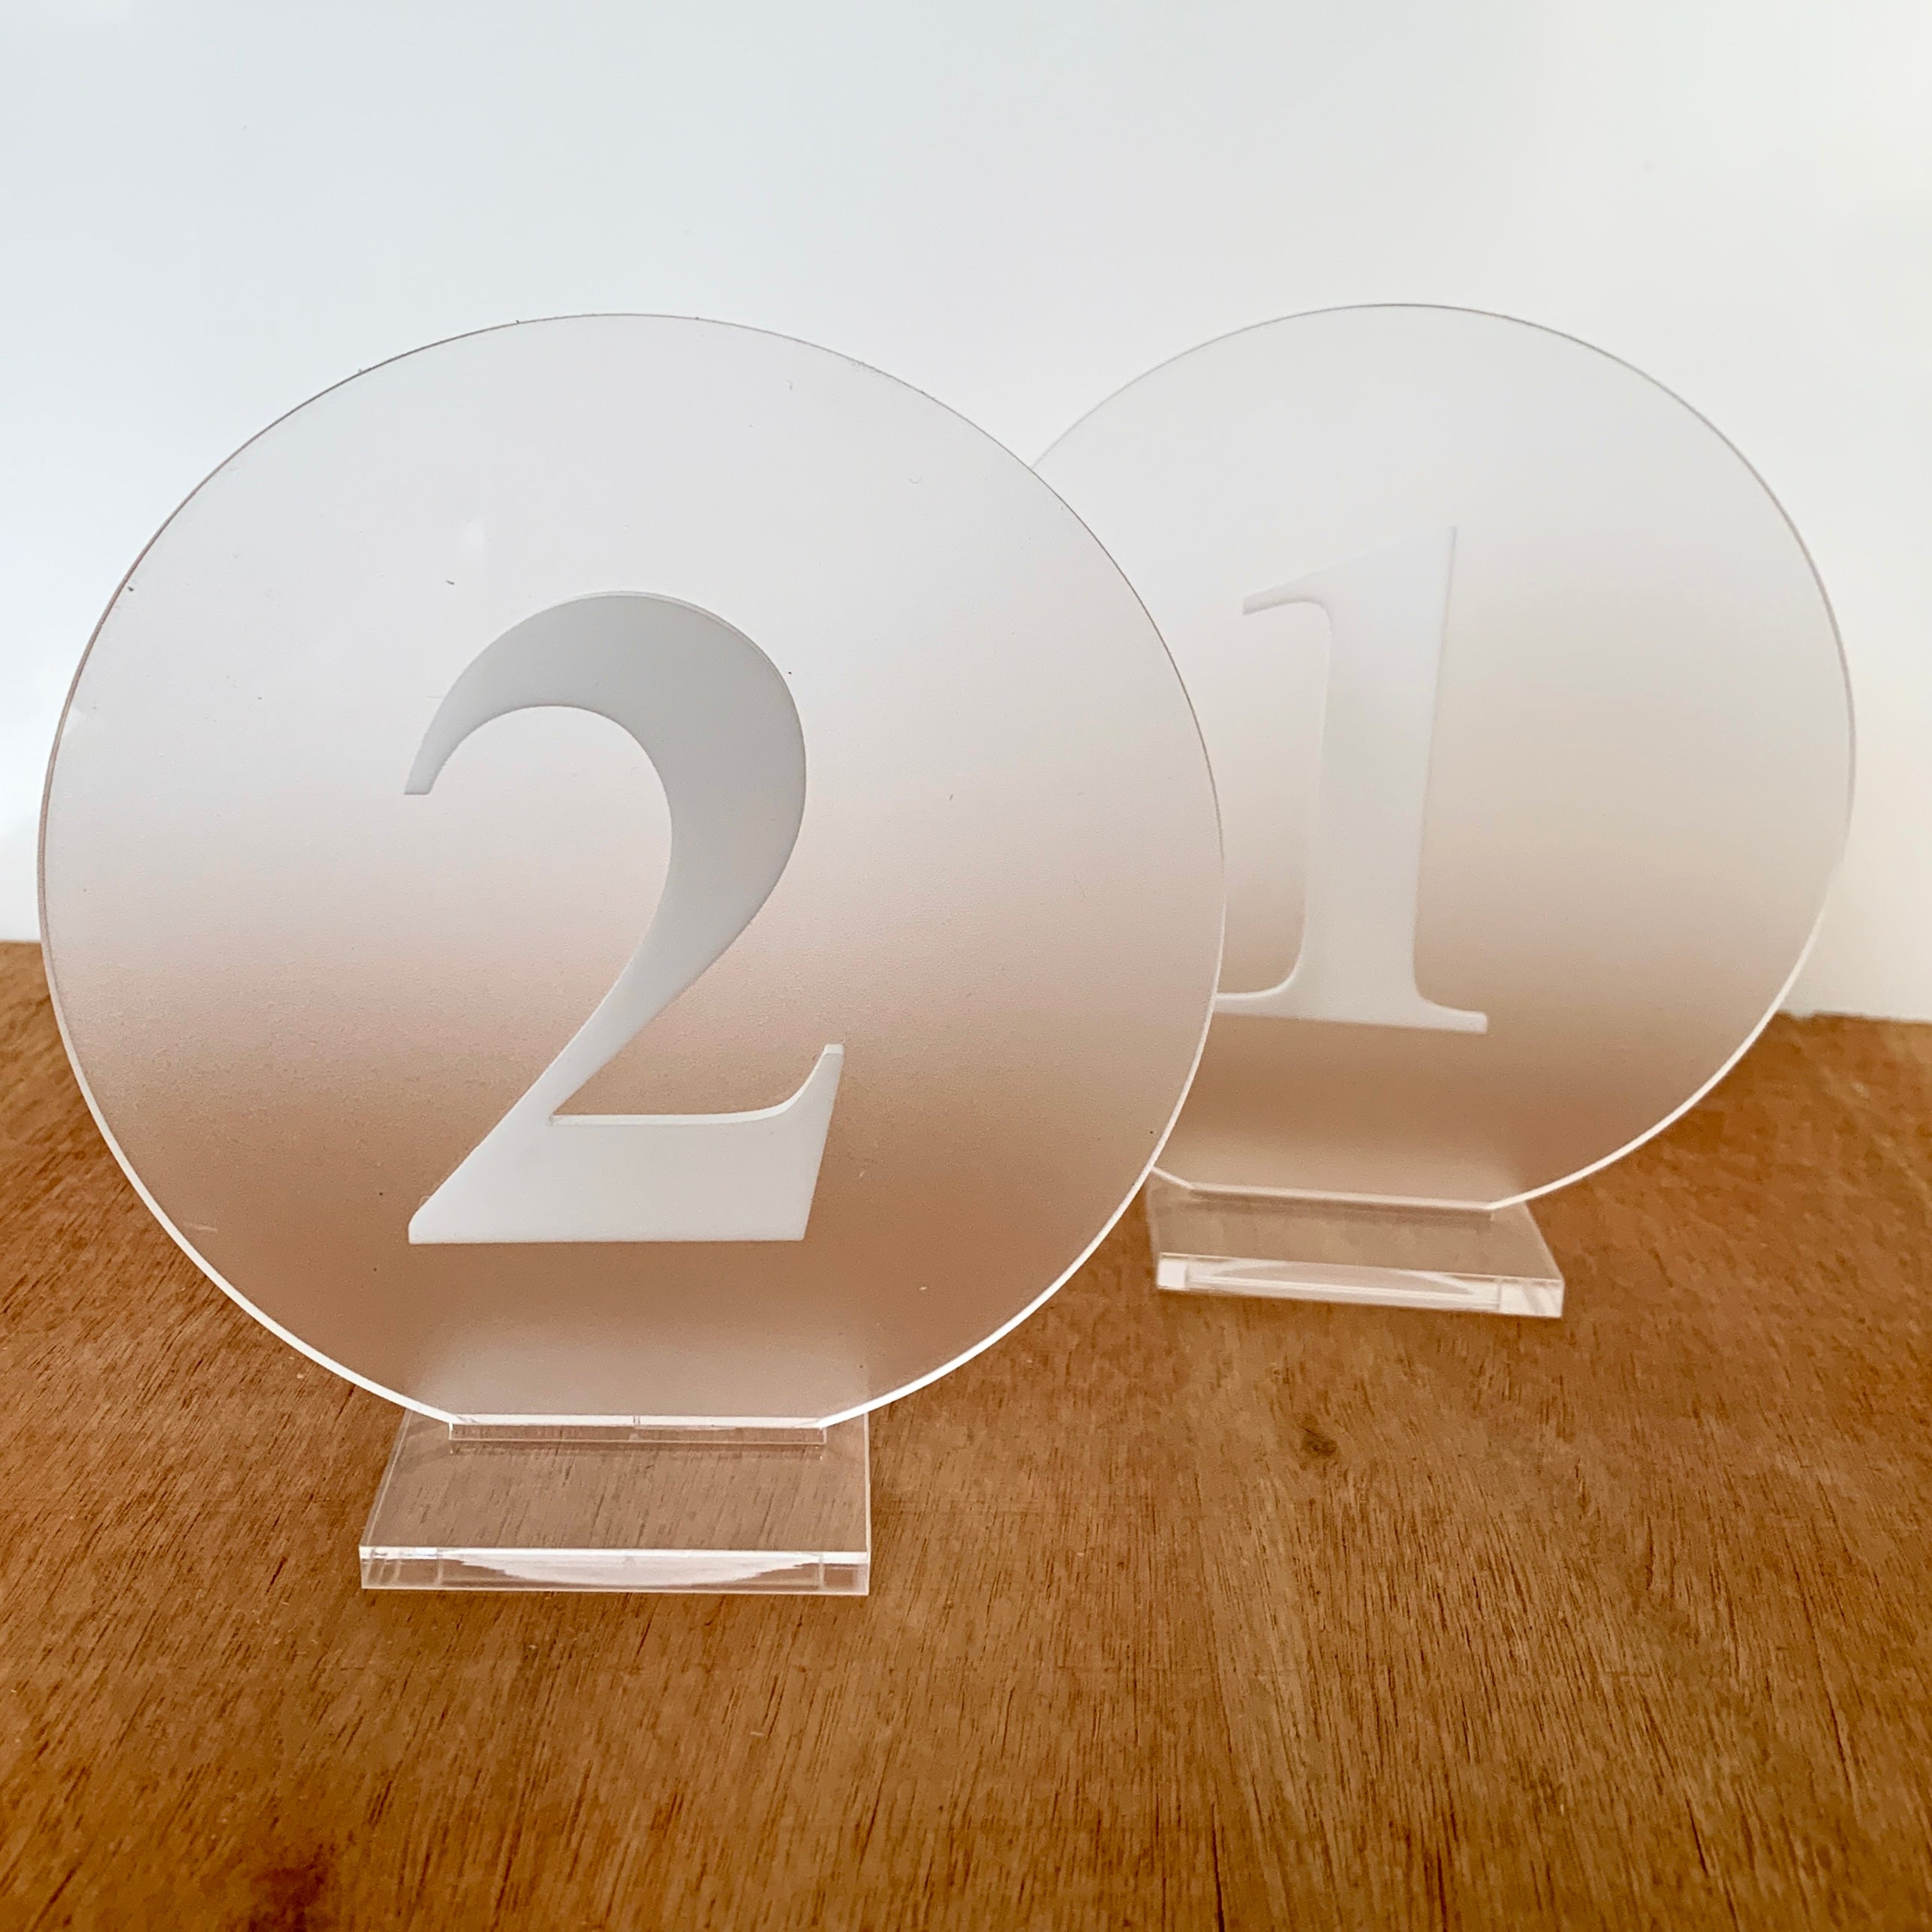 Numbered markers in satin plexiglass and glossy white numbers